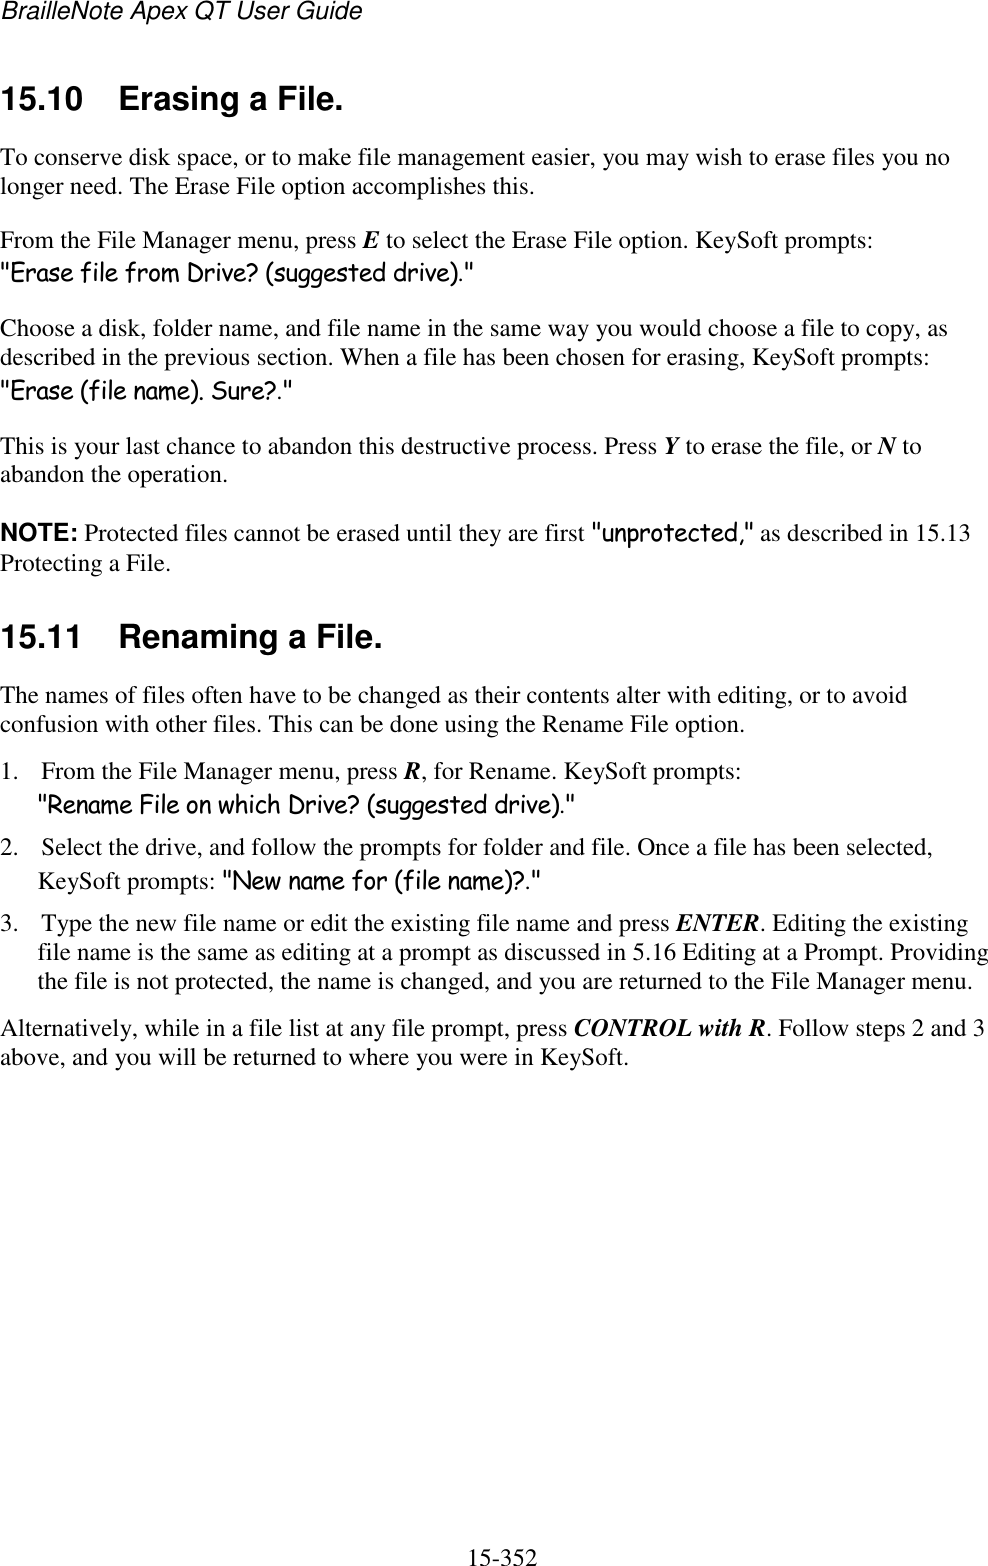 BrailleNote Apex QT User Guide  15-352   15.10  Erasing a File. To conserve disk space, or to make file management easier, you may wish to erase files you no longer need. The Erase File option accomplishes this. From the File Manager menu, press E to select the Erase File option. KeySoft prompts: &quot;Erase file from Drive? (suggested drive).&quot; Choose a disk, folder name, and file name in the same way you would choose a file to copy, as described in the previous section. When a file has been chosen for erasing, KeySoft prompts: &quot;Erase (file name). Sure?.&quot; This is your last chance to abandon this destructive process. Press Y to erase the file, or N to abandon the operation. NOTE: Protected files cannot be erased until they are first &quot;unprotected,&quot; as described in 15.13 Protecting a File.  15.11  Renaming a File. The names of files often have to be changed as their contents alter with editing, or to avoid confusion with other files. This can be done using the Rename File option.  1. From the File Manager menu, press R, for Rename. KeySoft prompts: &quot;Rename File on which Drive? (suggested drive).&quot; 2. Select the drive, and follow the prompts for folder and file. Once a file has been selected, KeySoft prompts: &quot;New name for (file name)?.&quot; 3. Type the new file name or edit the existing file name and press ENTER. Editing the existing file name is the same as editing at a prompt as discussed in 5.16 Editing at a Prompt. Providing the file is not protected, the name is changed, and you are returned to the File Manager menu. Alternatively, while in a file list at any file prompt, press CONTROL with R. Follow steps 2 and 3 above, and you will be returned to where you were in KeySoft.  